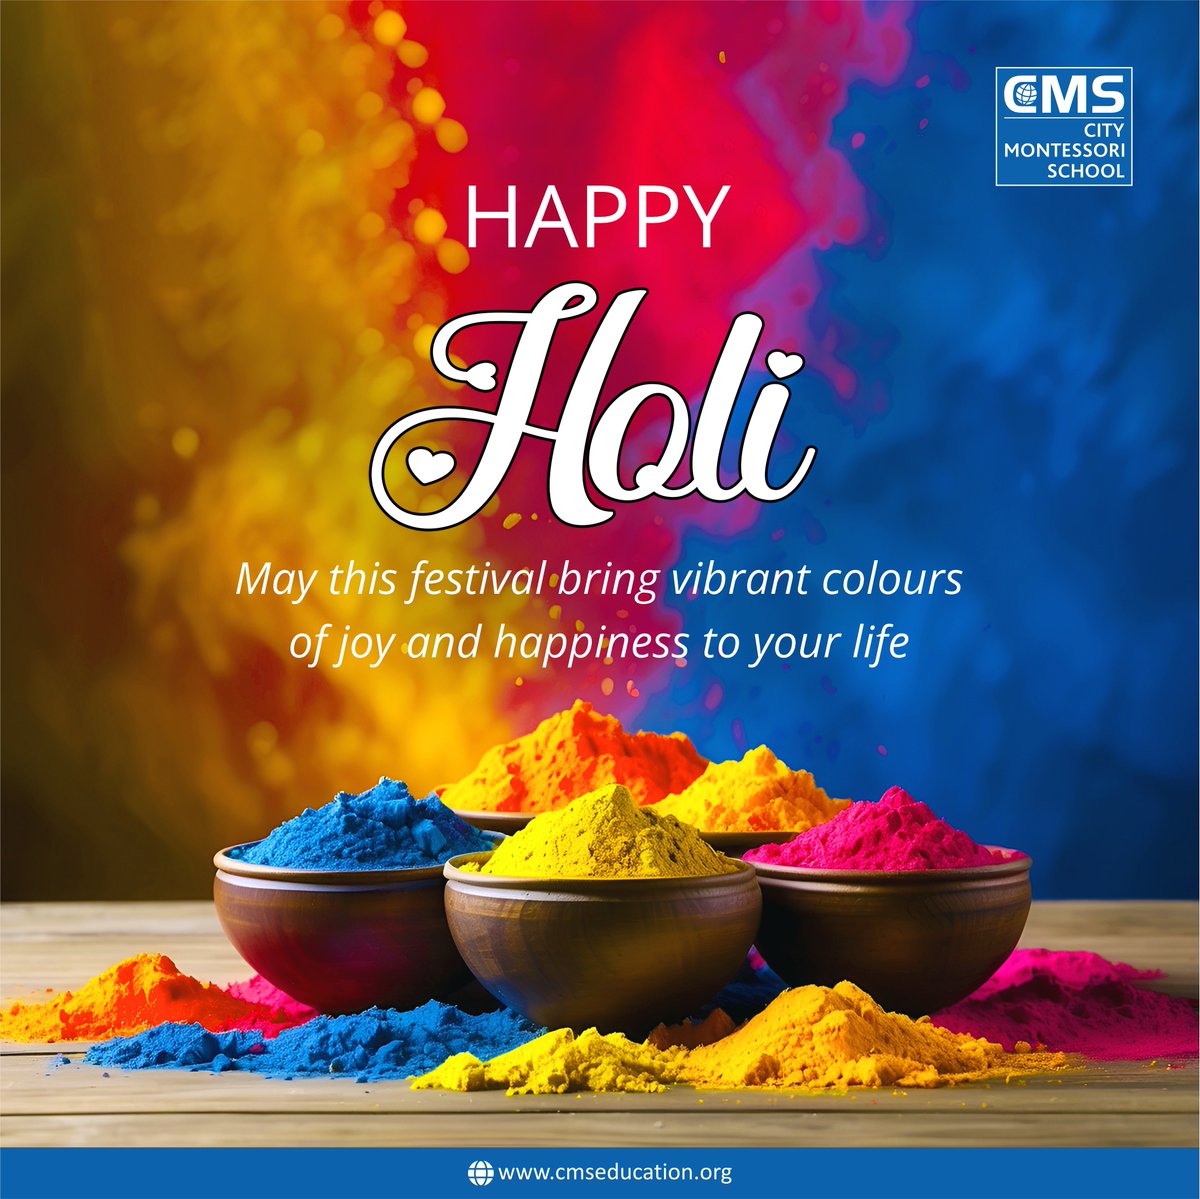 Wishing a colorful and joyful Holi to all our students, staff, and their families! May the colors of Holi fill your lives with happiness, harmony, and positivity. 📷📷

#CMS #CMSeducation #CMSStudents #Holi #HappyHoli #ColorfulCelebration